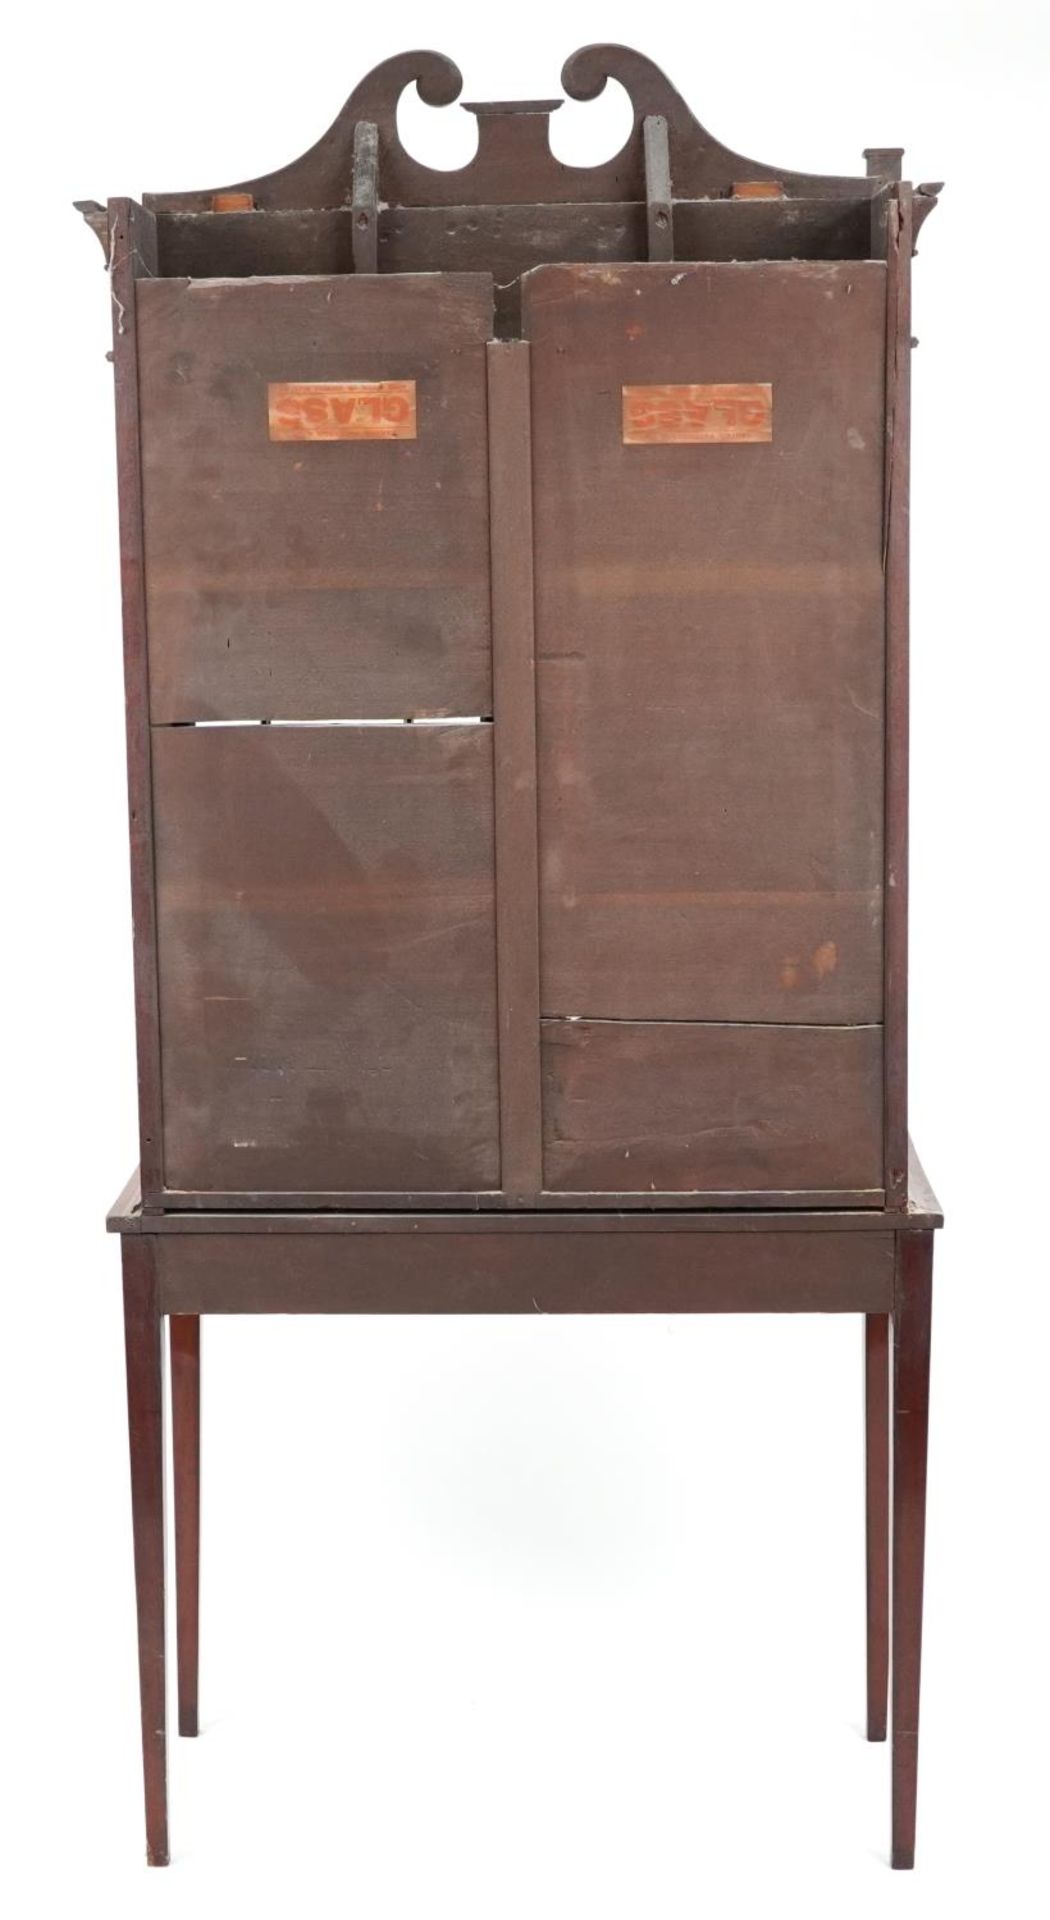 Edwardian inlaid mahogany bookcase on stand with astragal glazed doors on tapering legs, 189cm H x - Image 5 of 6